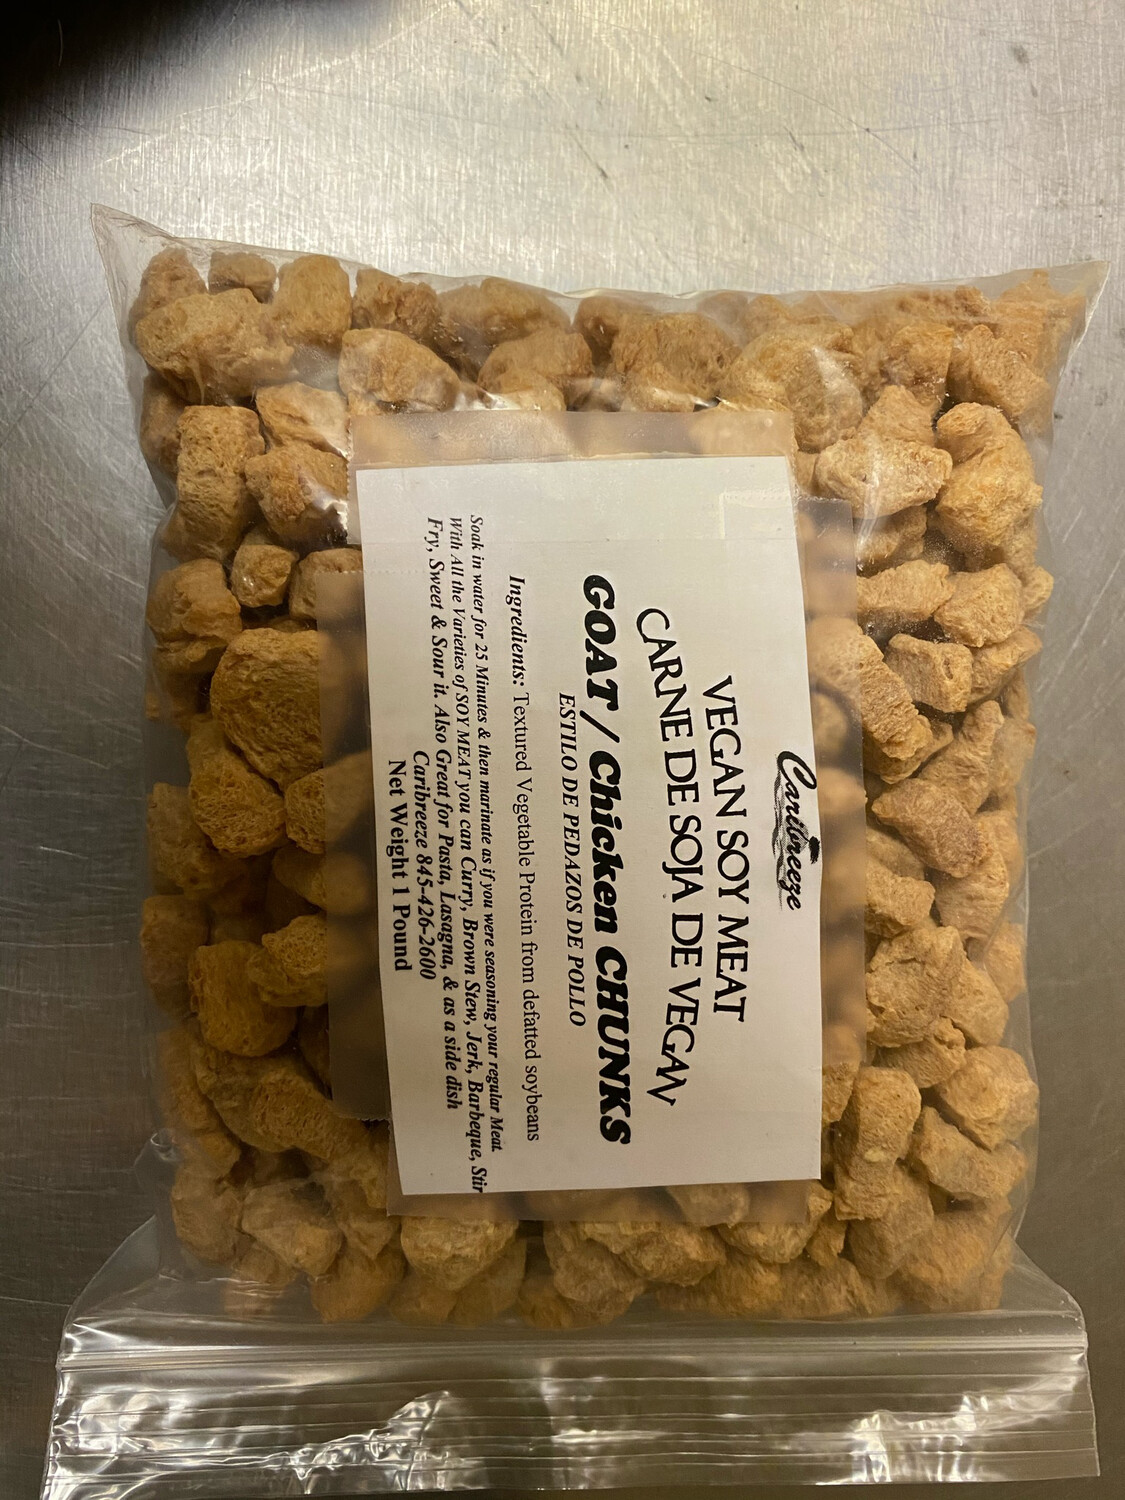 VEGAN MEAT Soy Chunks Goat or Chicken STYLE chunk style 12 ounces